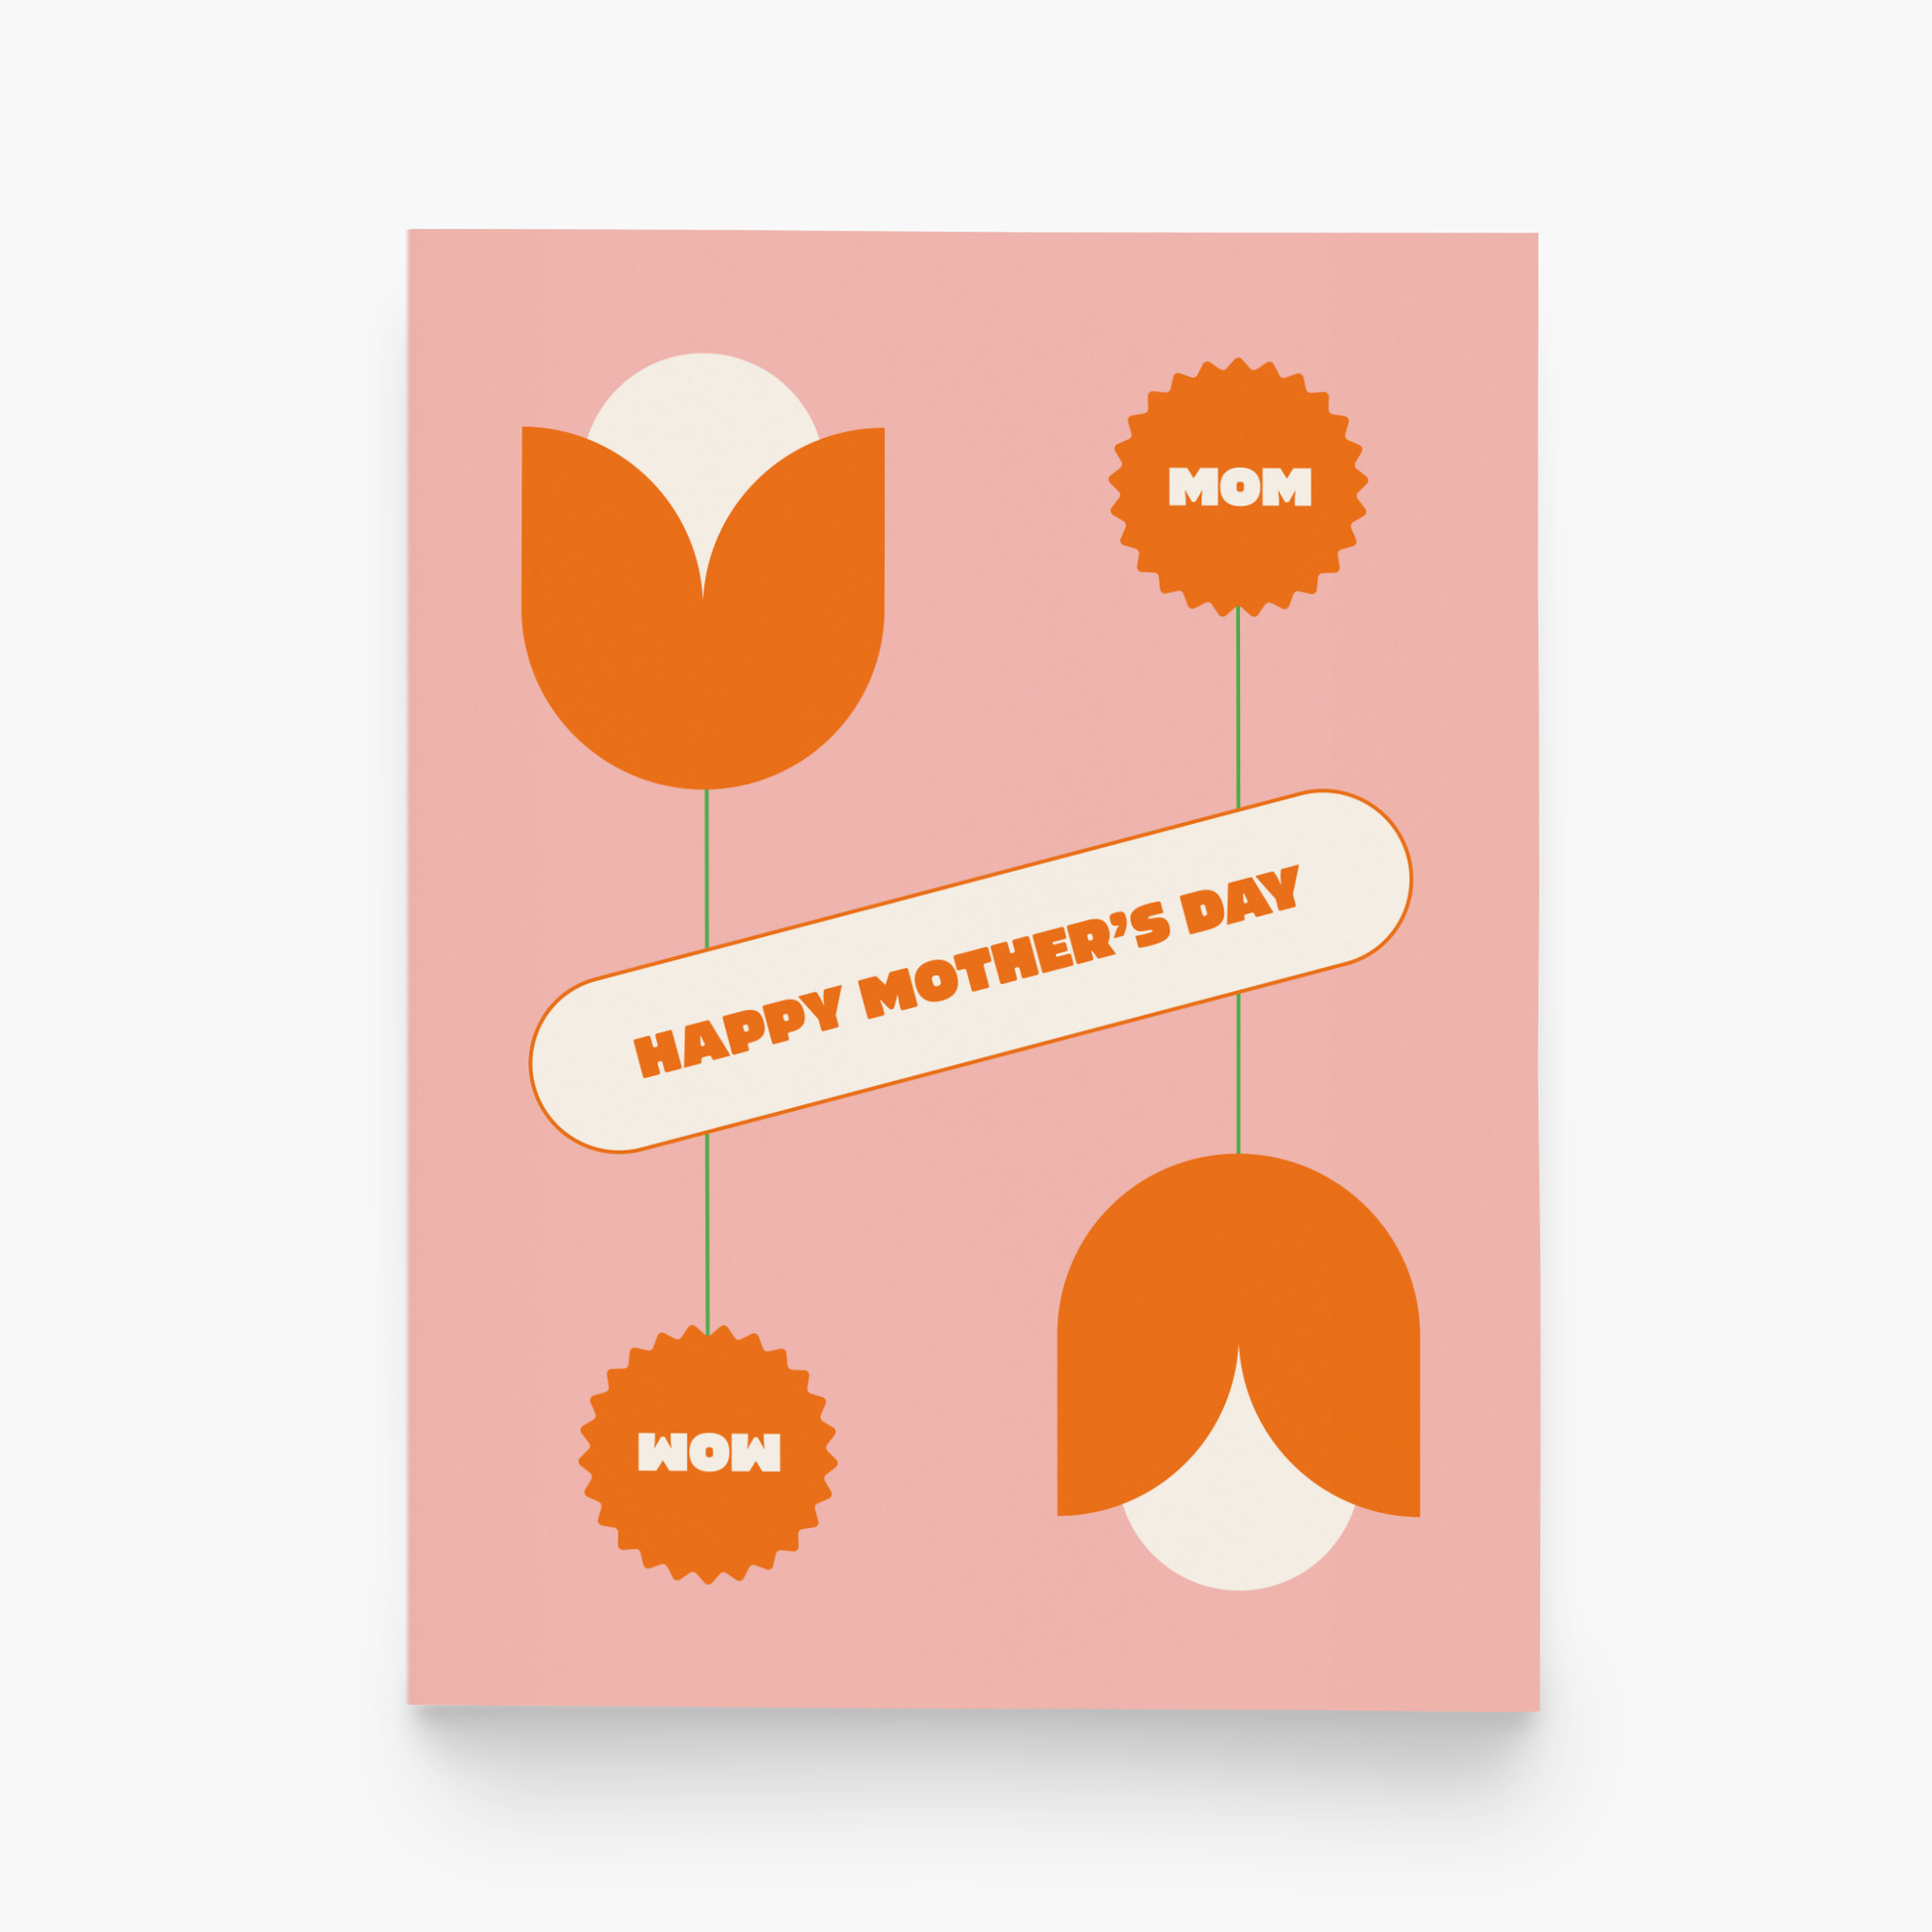 Happy Mother’s Day Tulips Greeting Card - The Crowd Went Wild